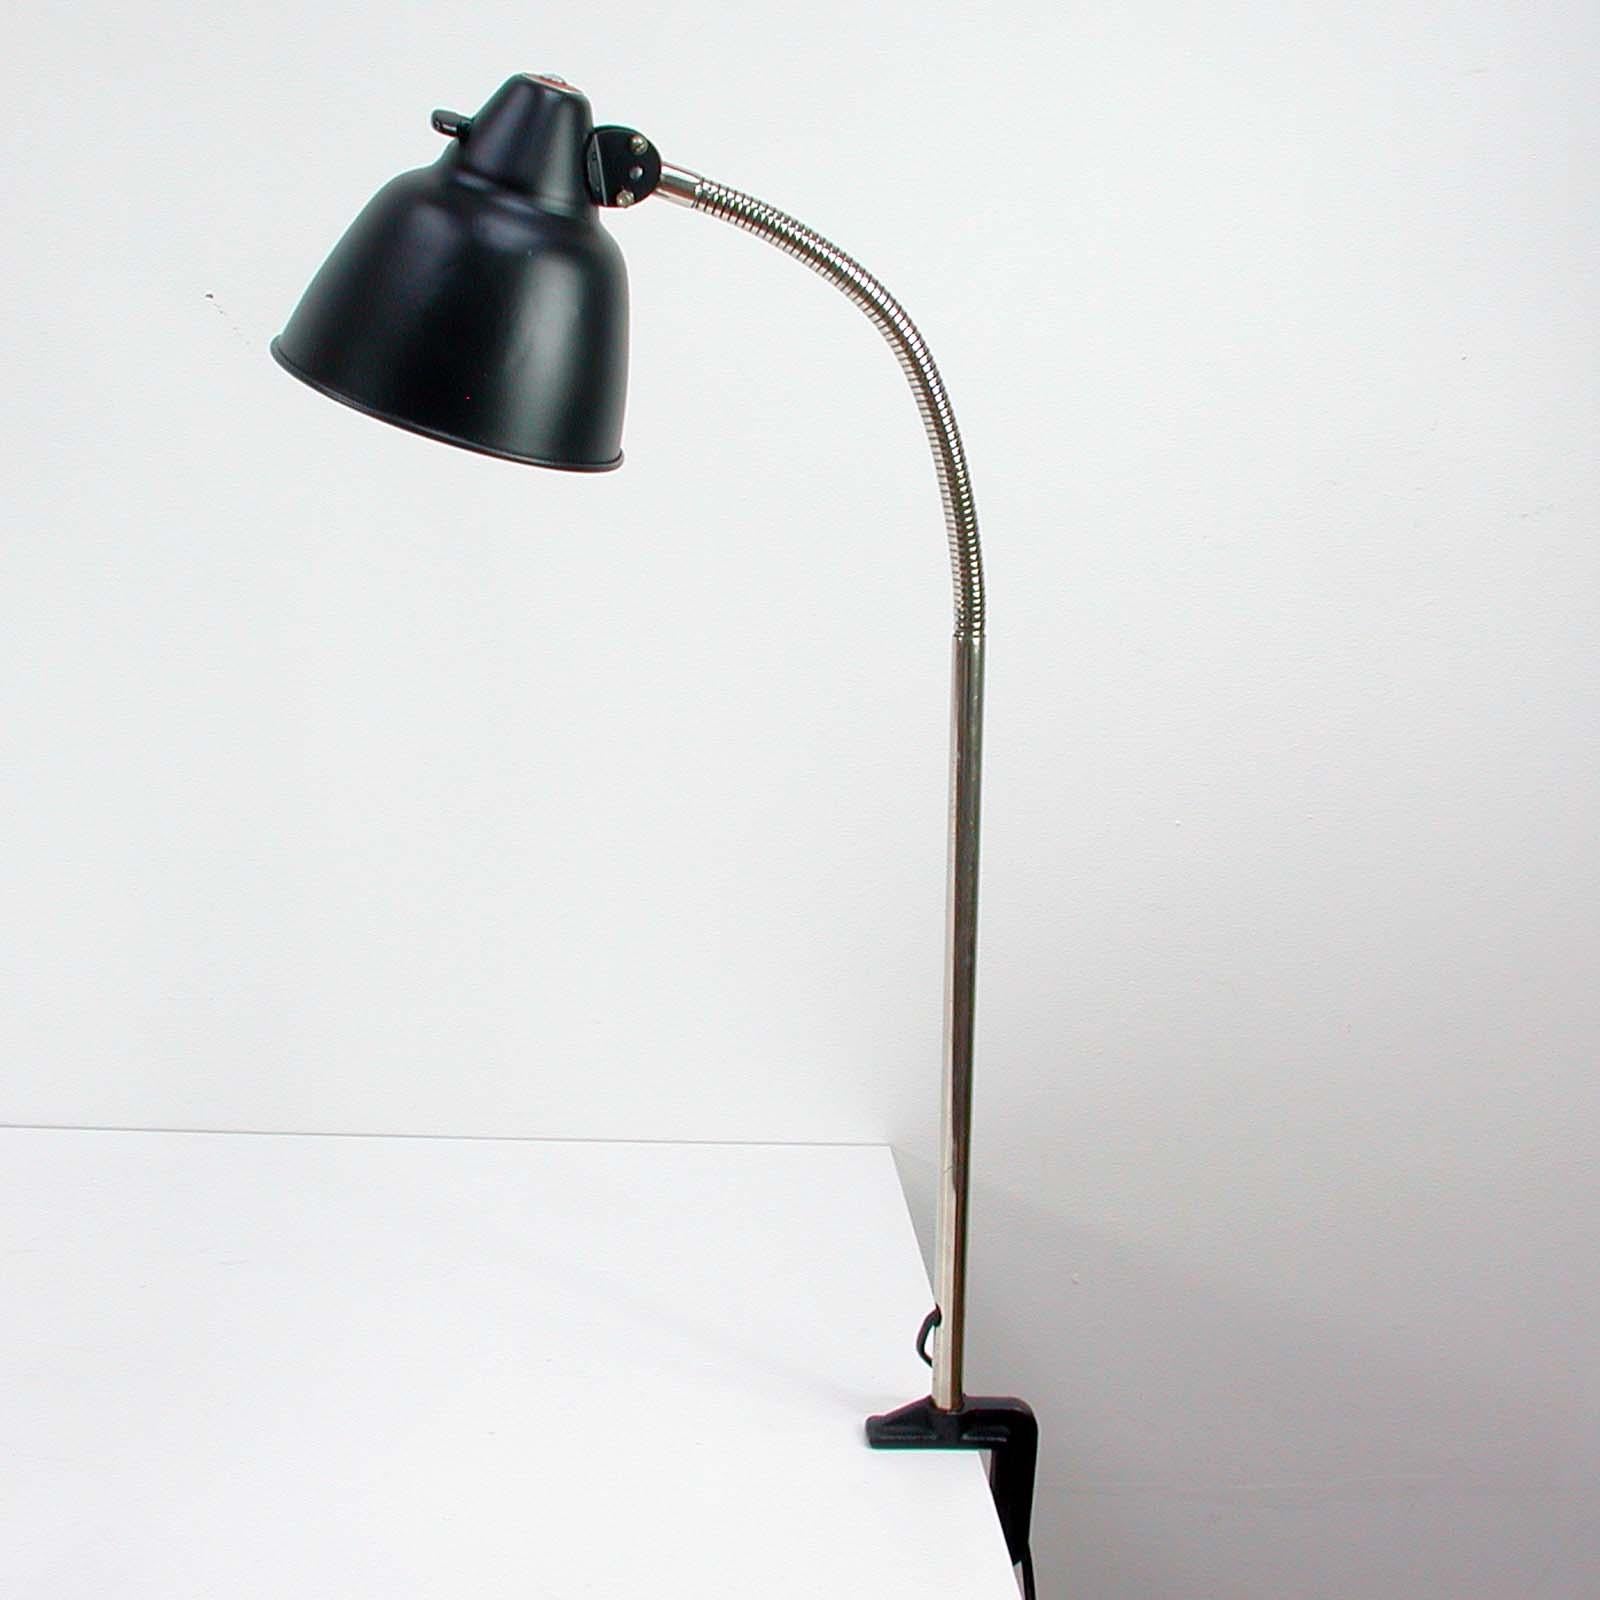 Mid-20th Century Vintage Industrial Desk Light from Helo Leuchten, Germany 1950s For Sale